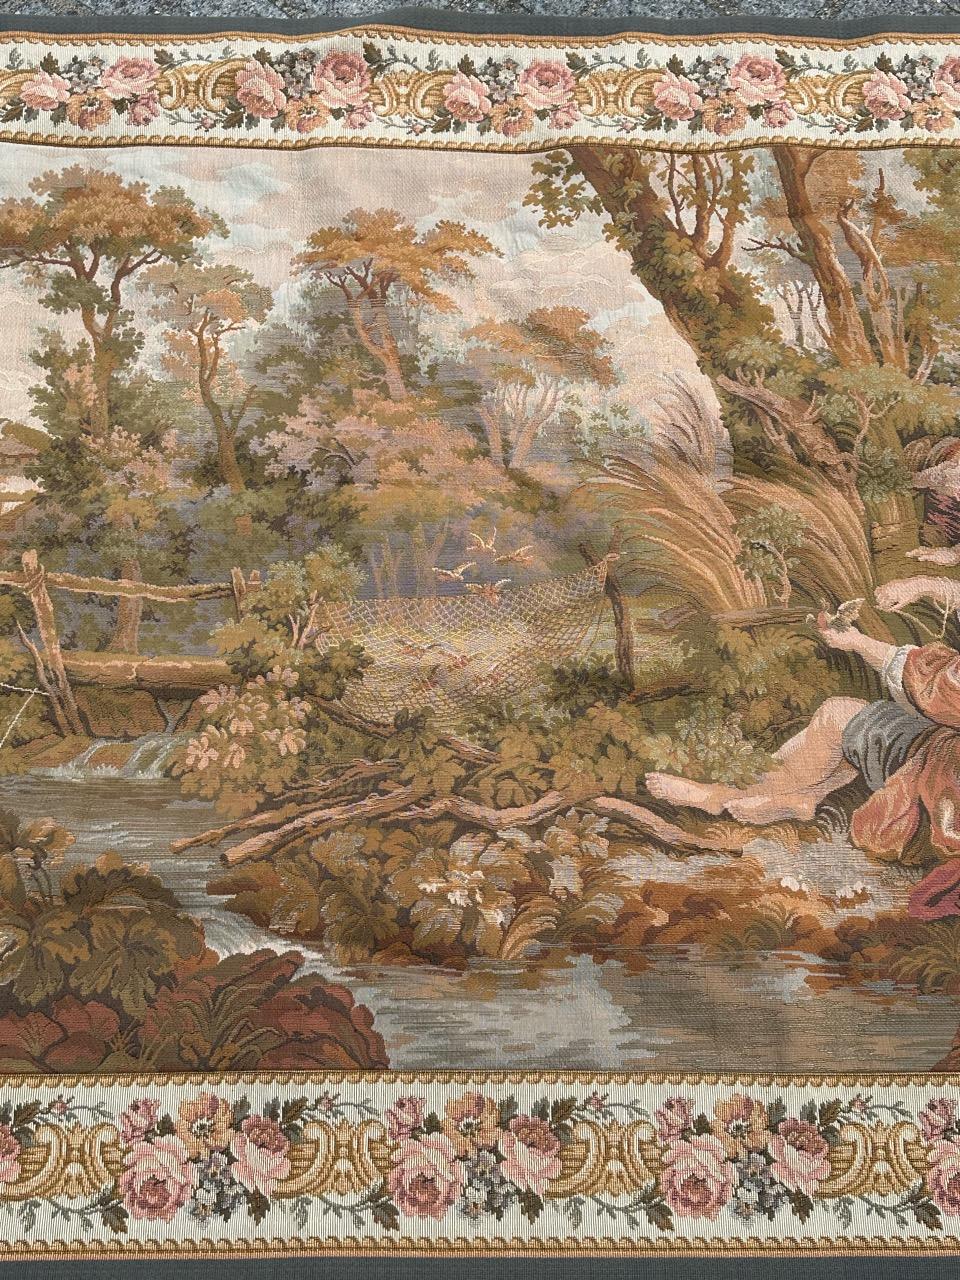 Aubusson Bobyrug’s pretty vintage French jacquard tapestry « fishing by the water » For Sale